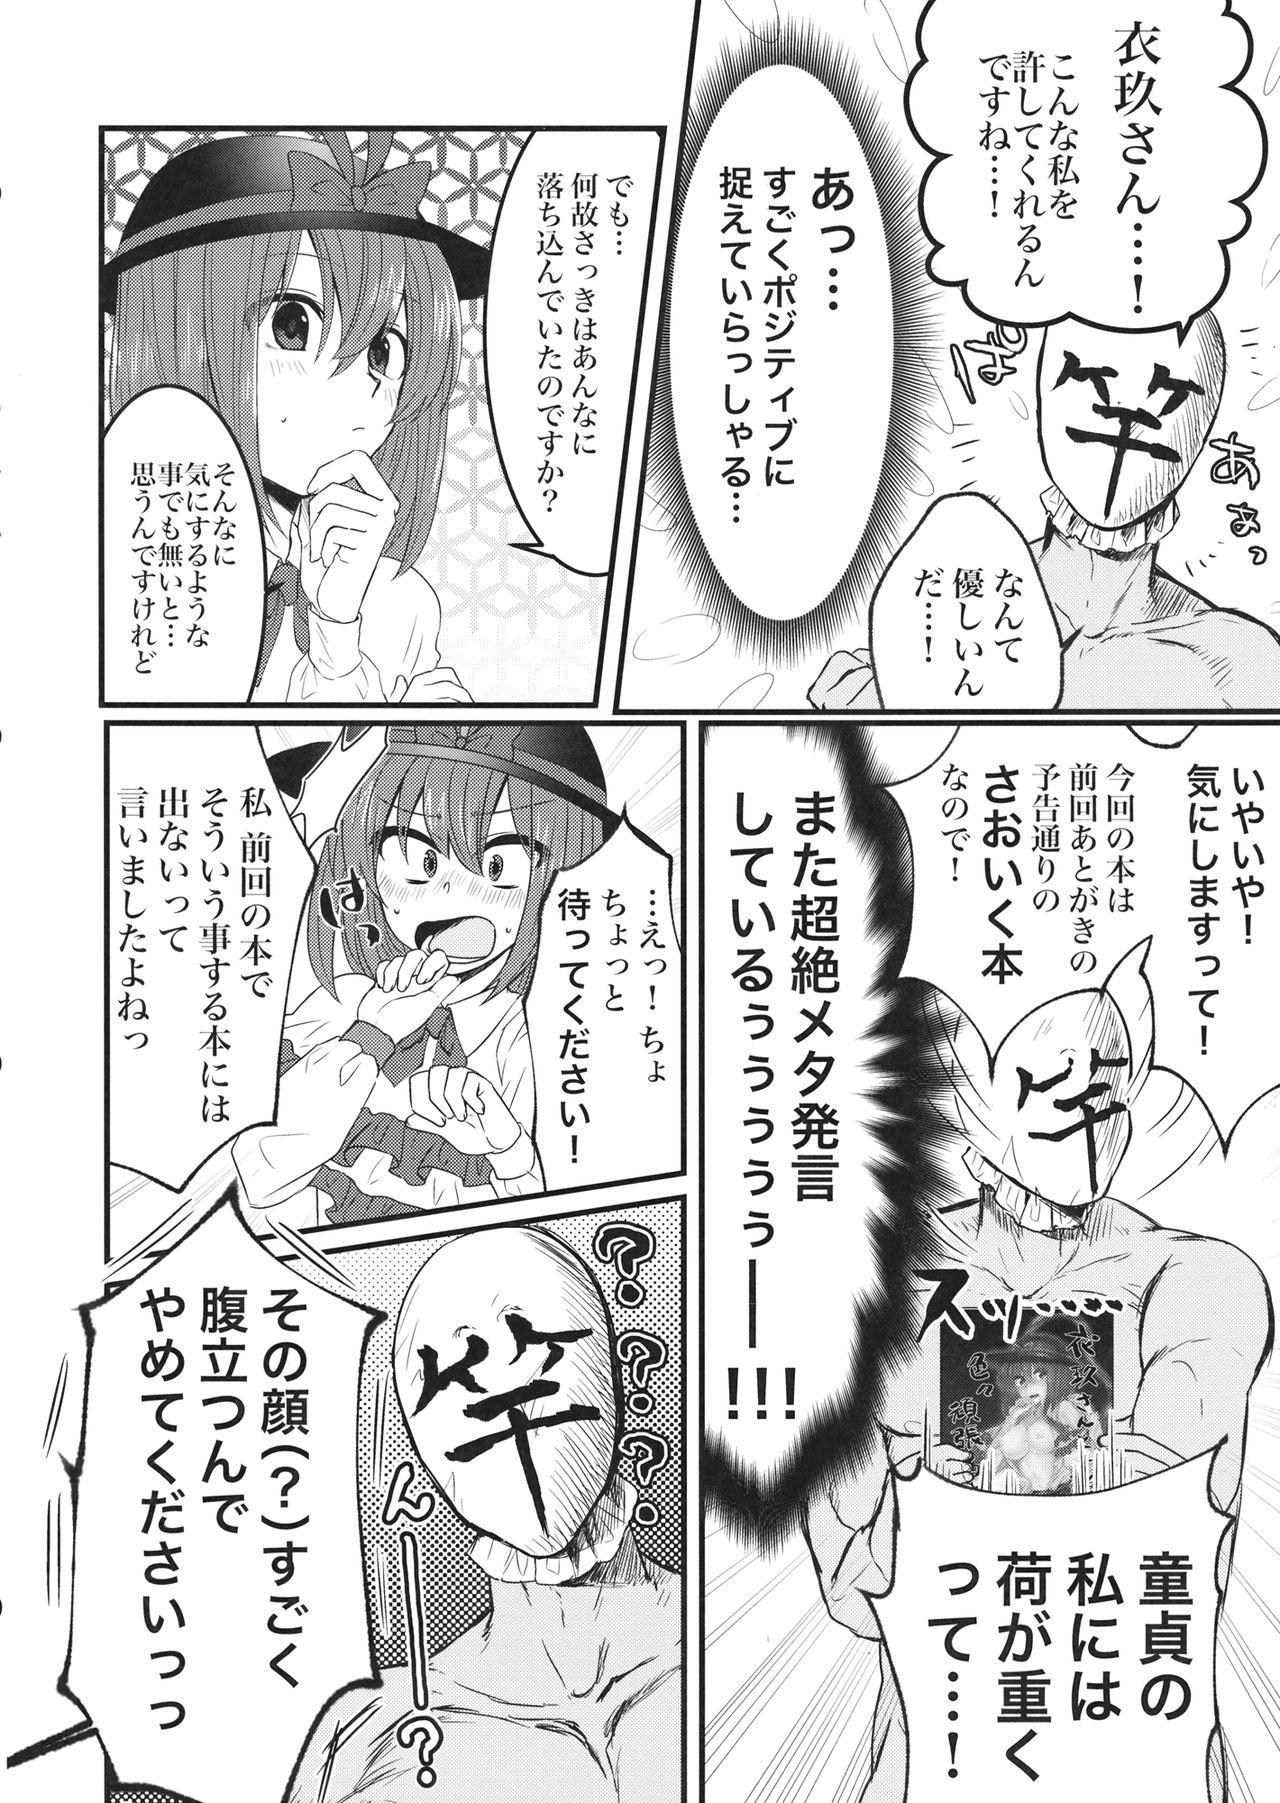 Culo 衣玖さんと一緒に色々頑張る本 - Touhou project Girls Getting Fucked - Page 7